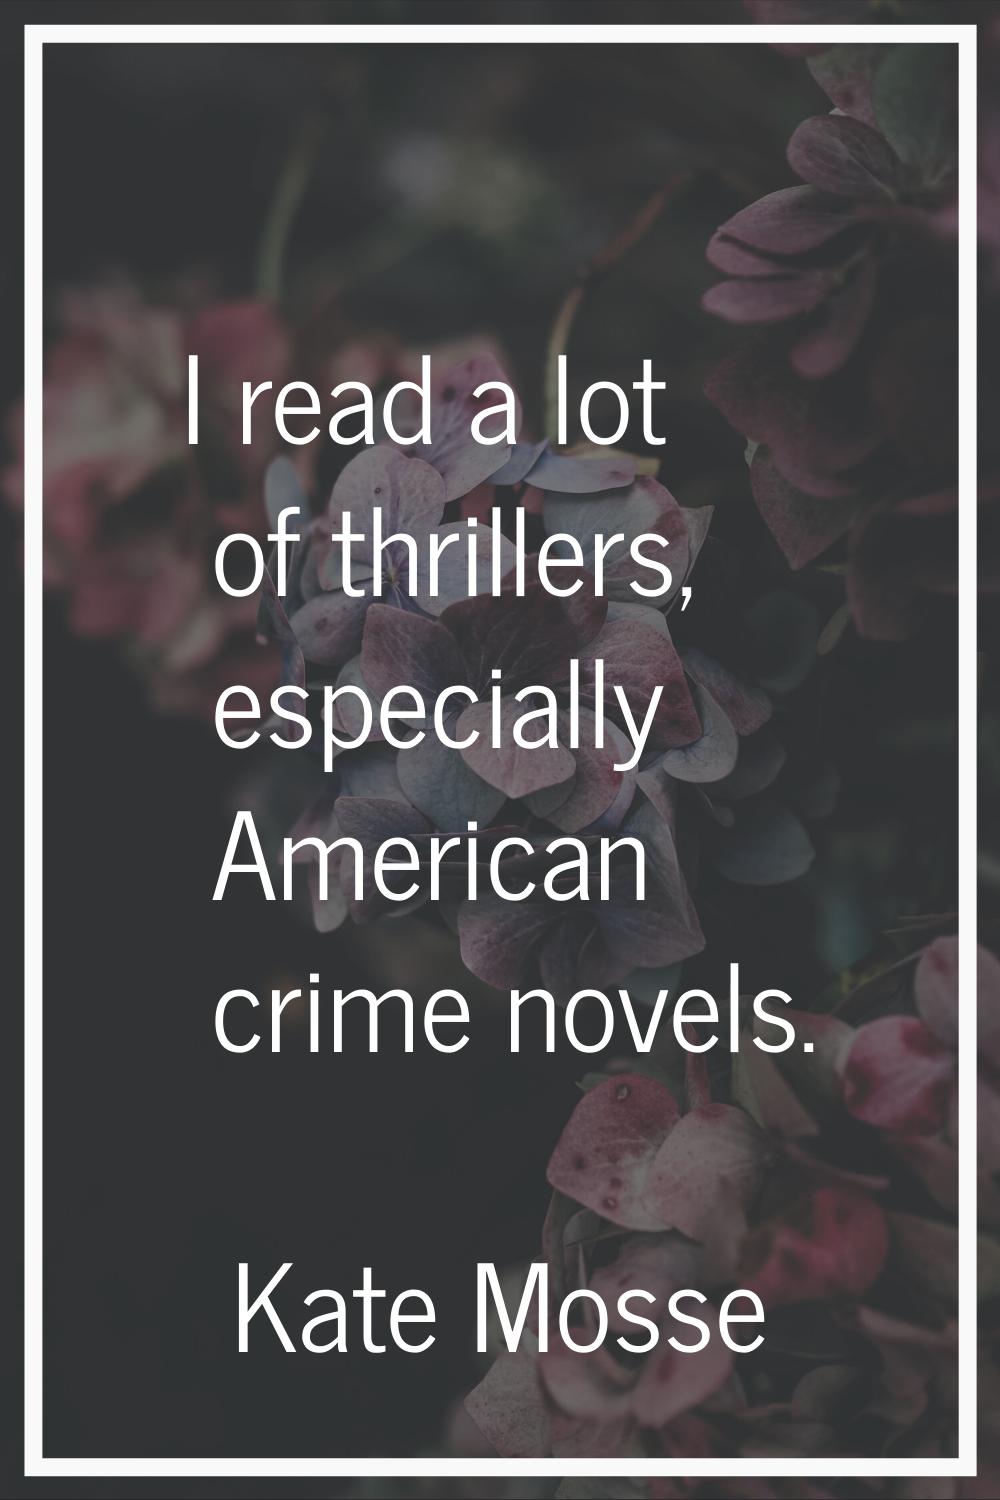 I read a lot of thrillers, especially American crime novels.